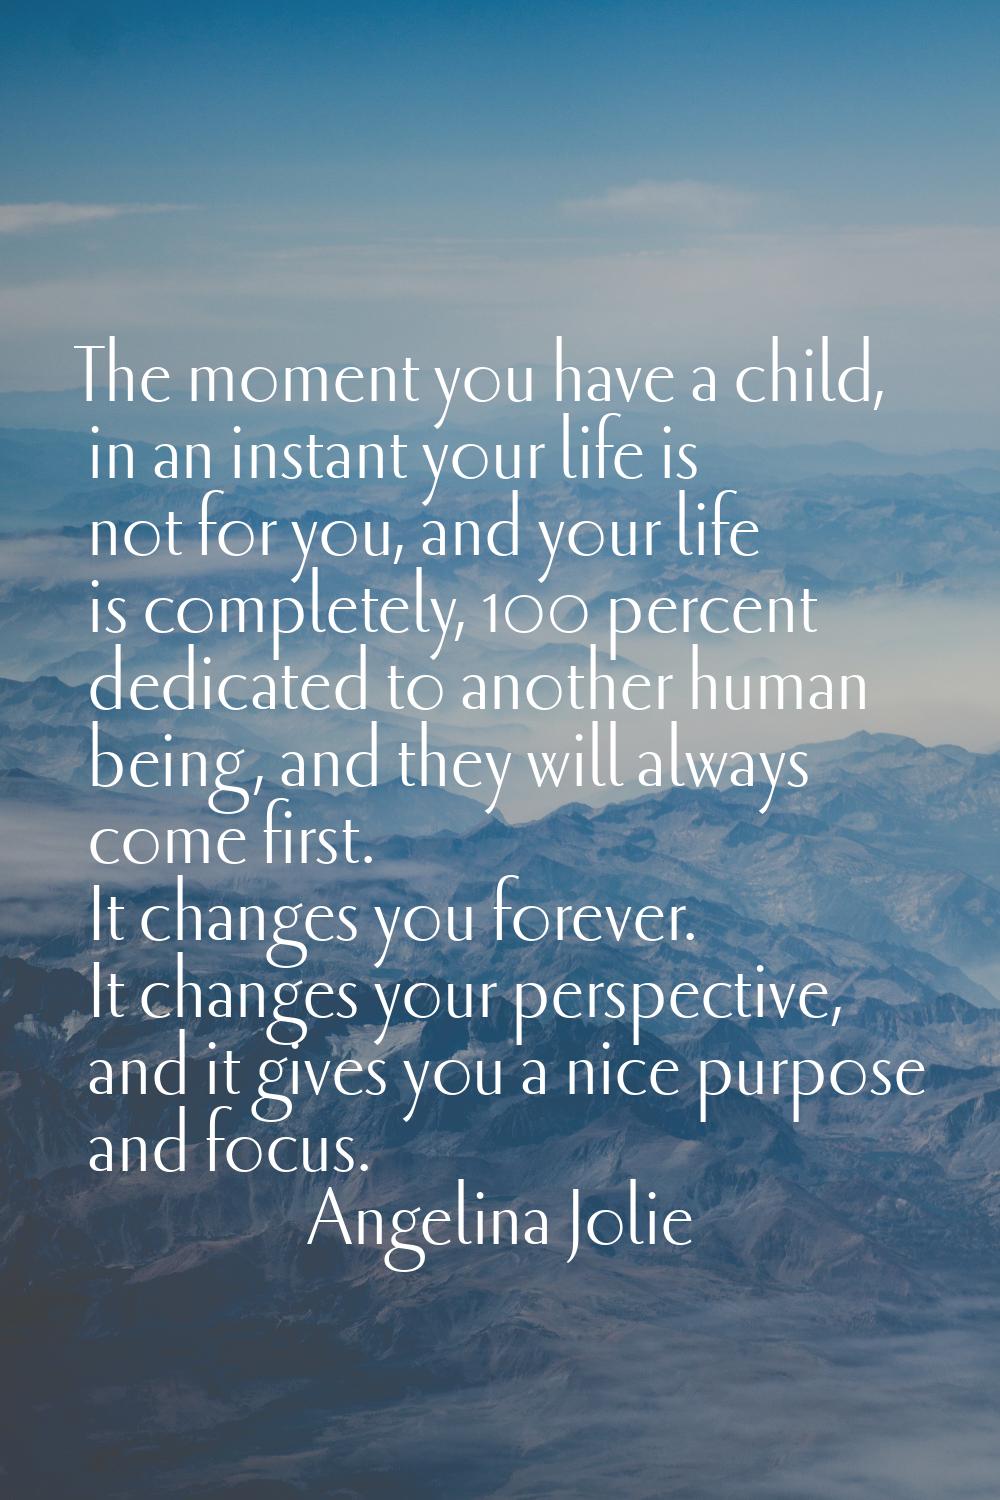 The moment you have a child, in an instant your life is not for you, and your life is completely, 1